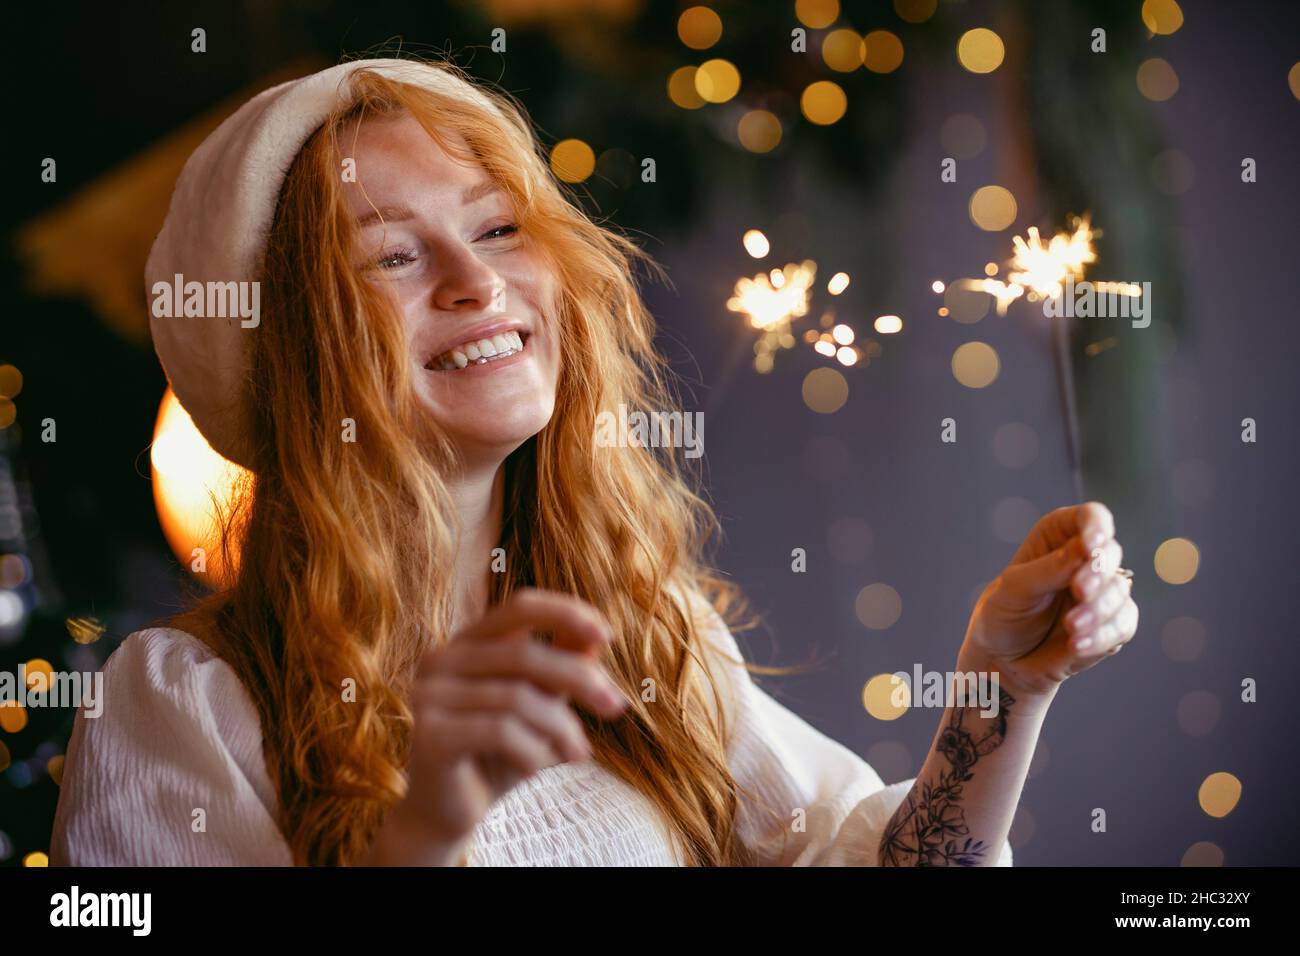 charming red-haired girl in a santa hat with sparklers in her hands smiling at the camera. Stock Photo